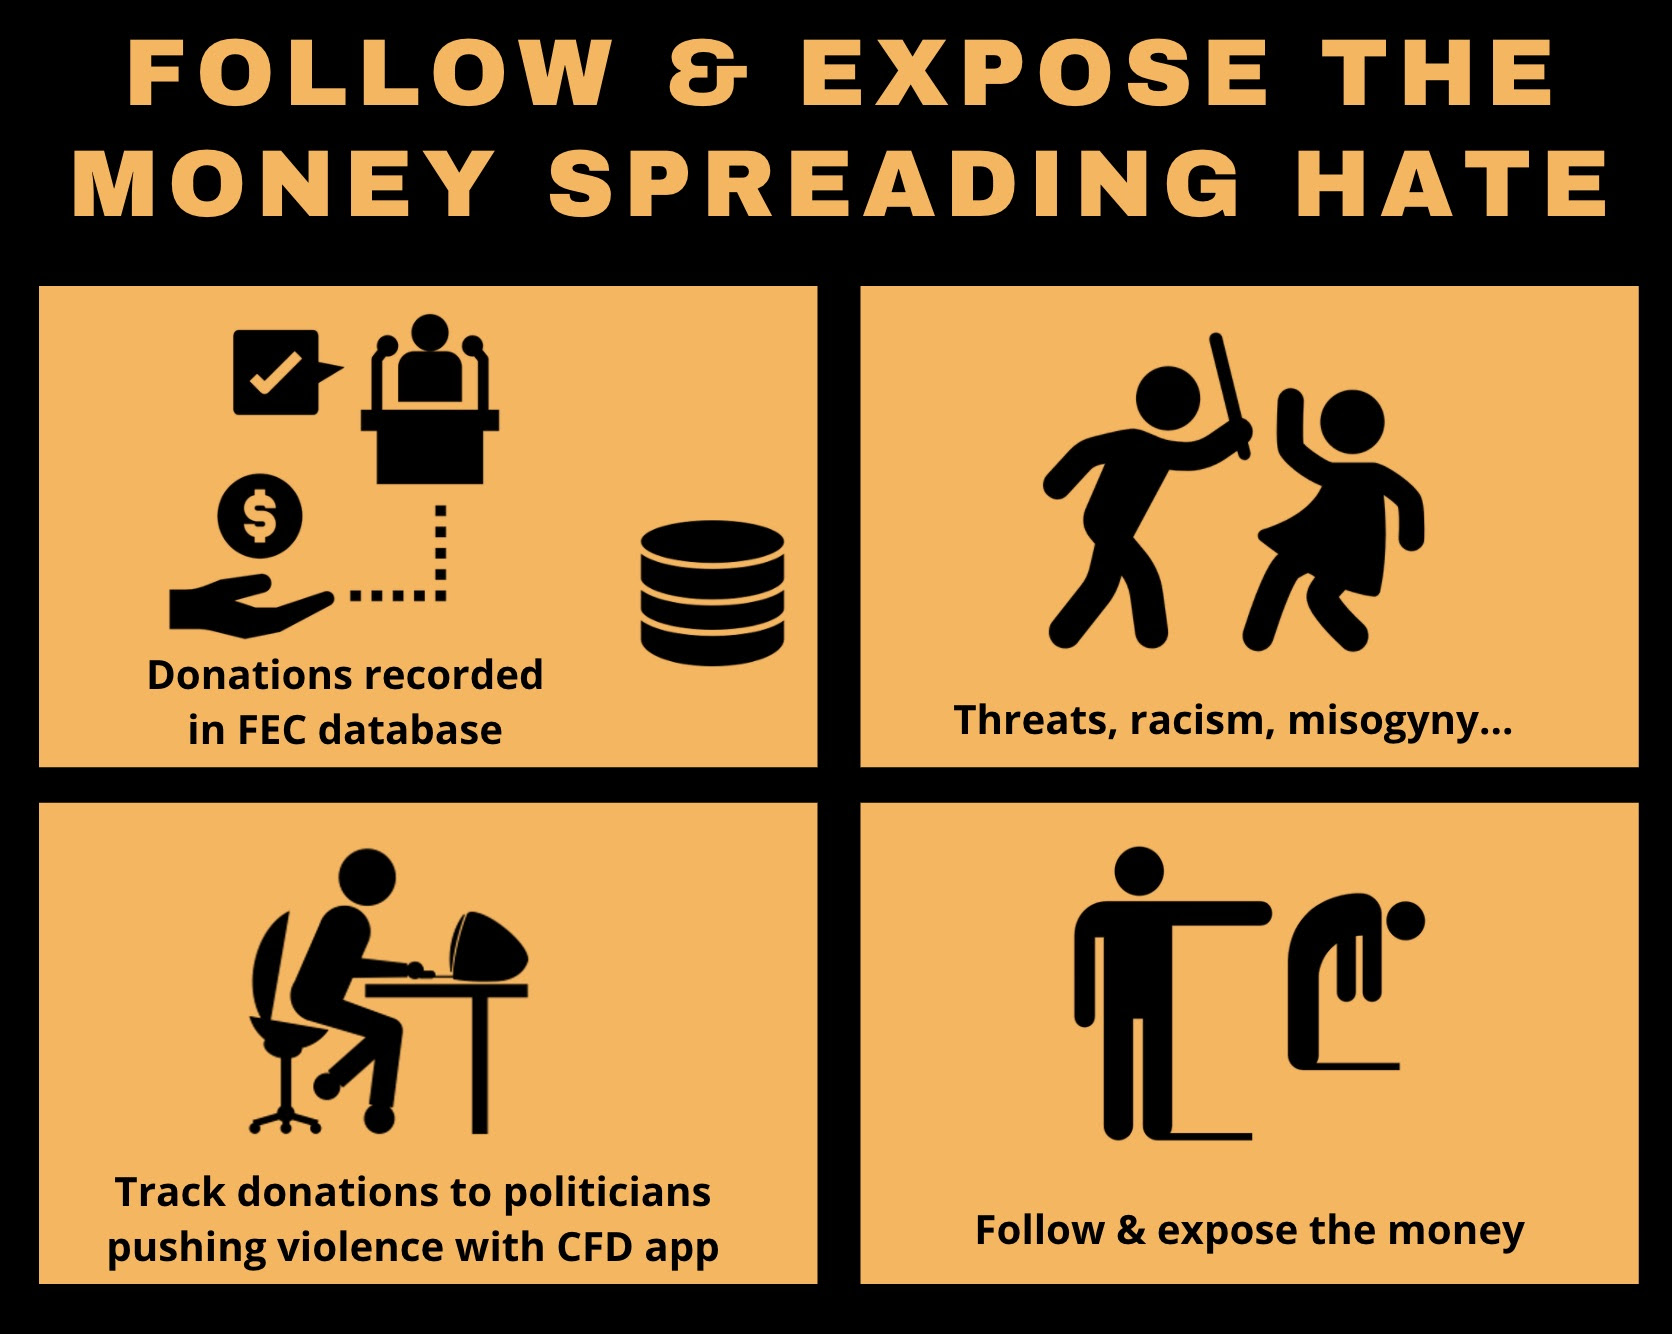 Follow and expose the money spreading hate and violence